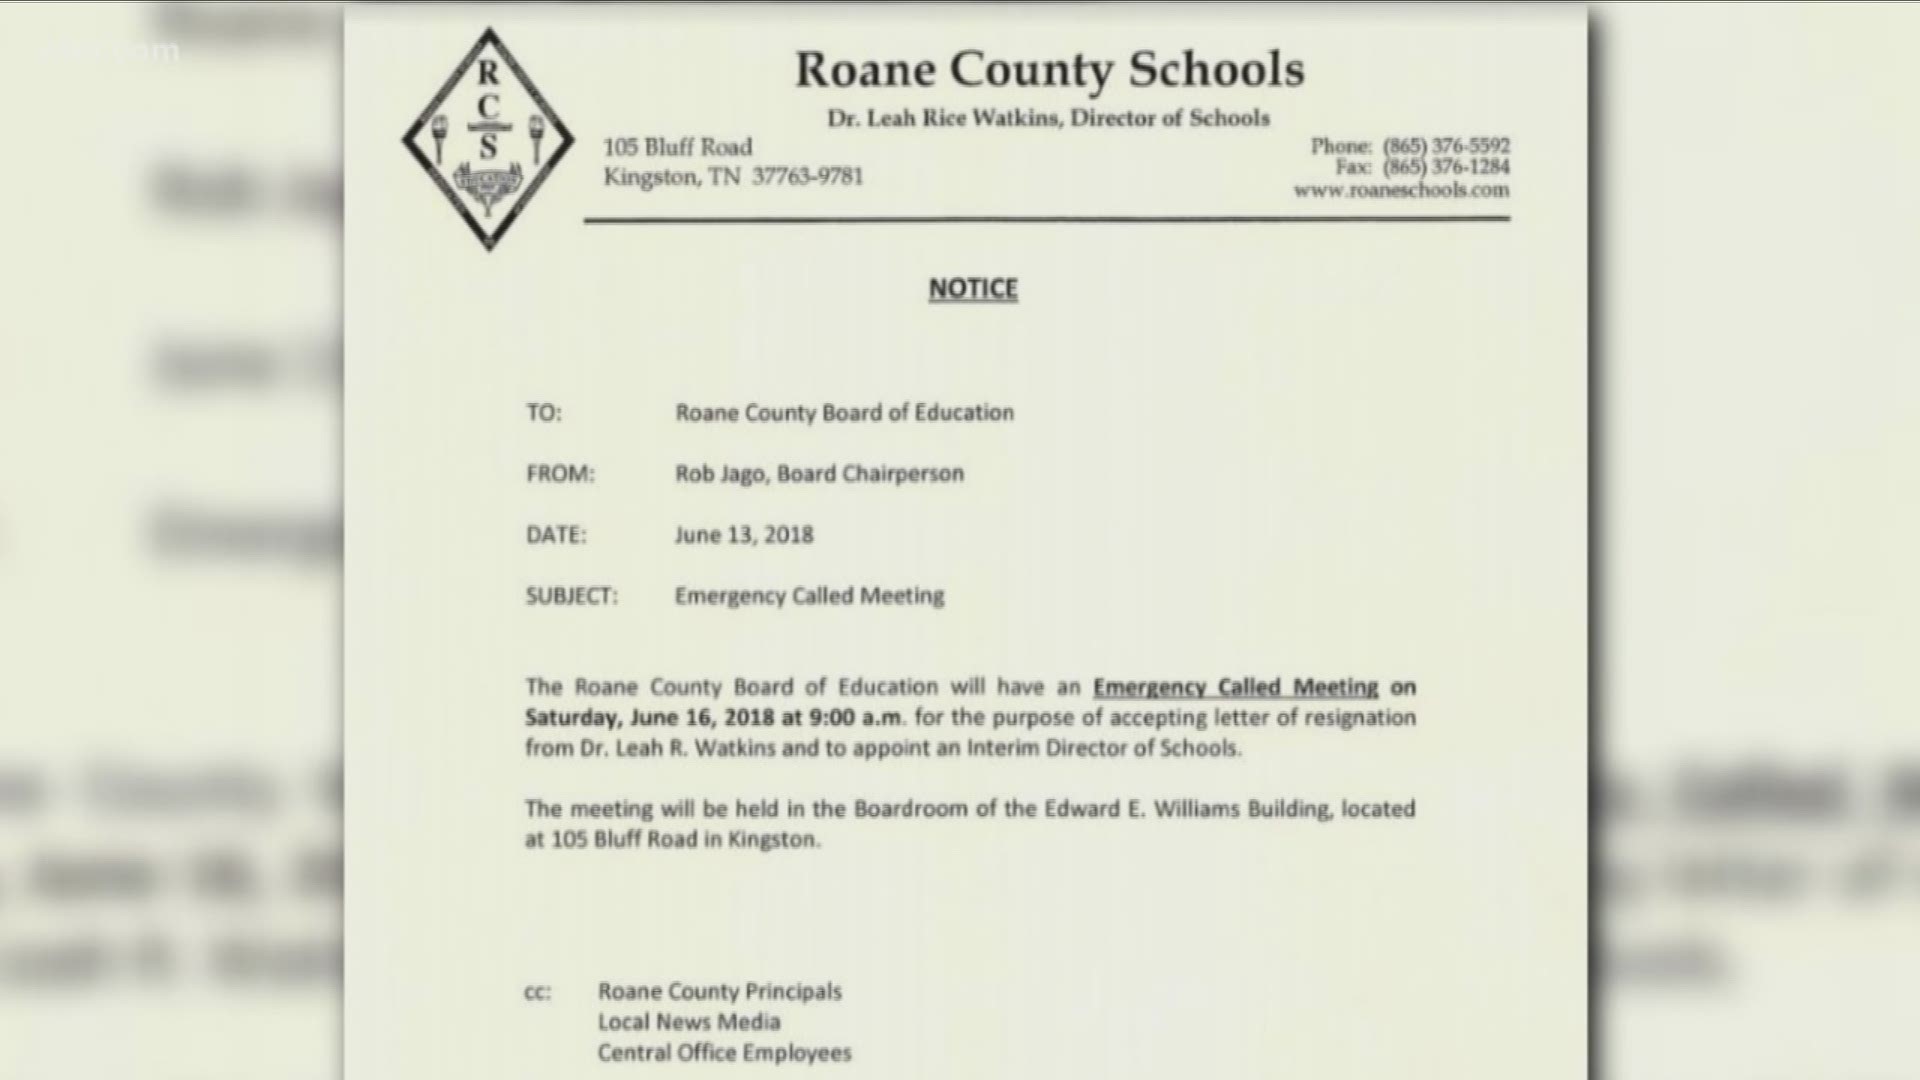 The board's chairperson sent a letter that states the board will accept a letter of resignation from its current director of schools, Dr. Leah Watkins.